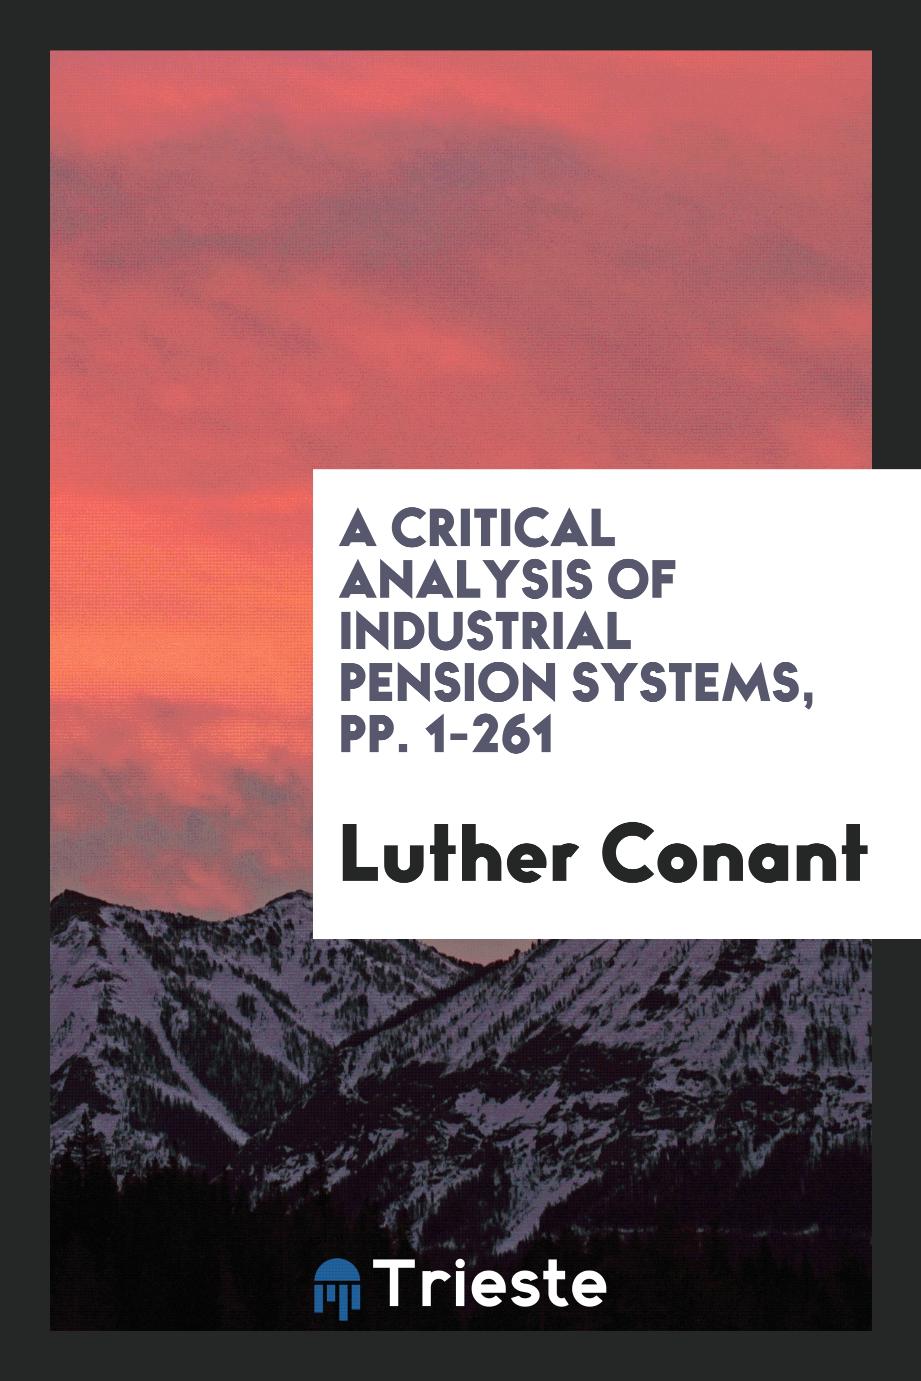 A Critical Analysis of Industrial Pension Systems, pp. 1-261